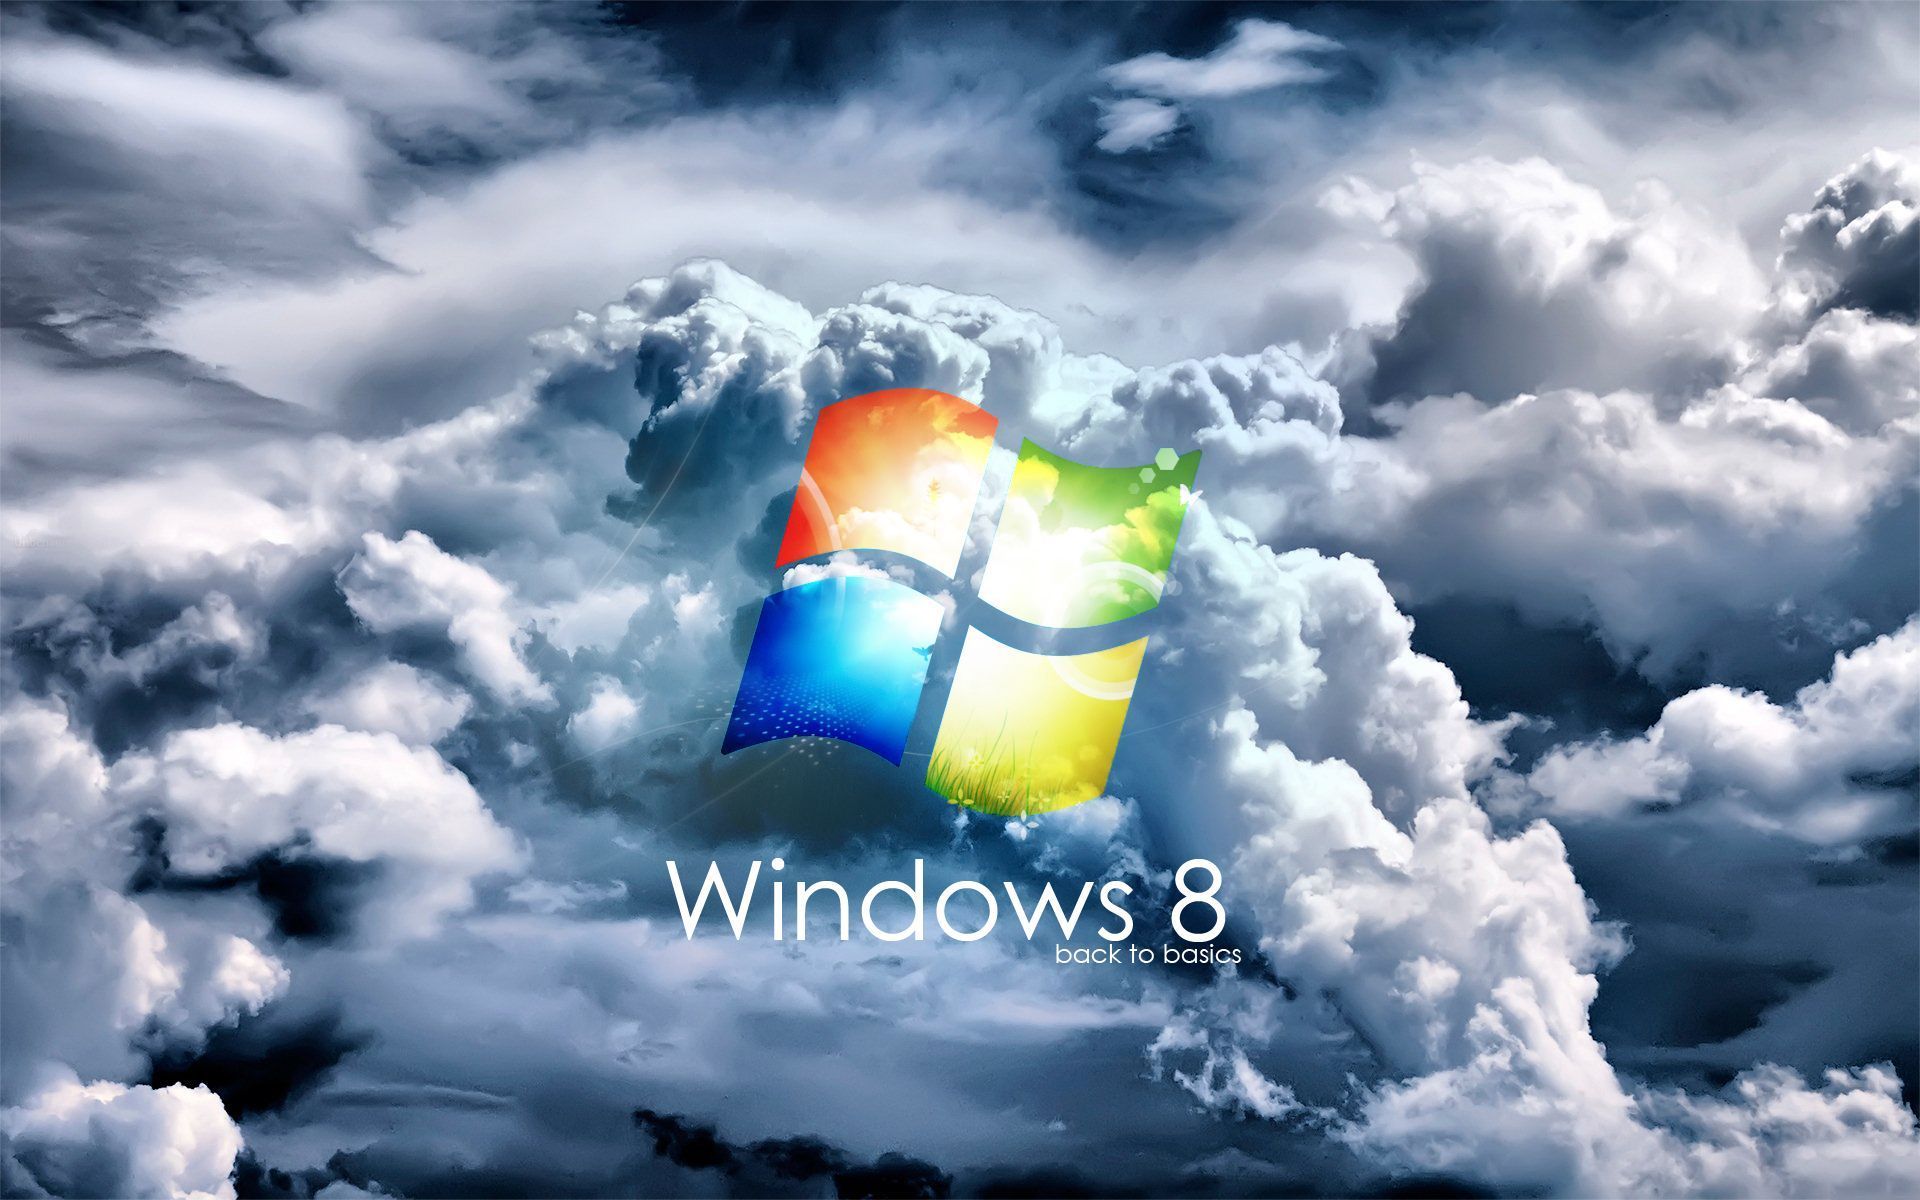 Download Microsoft Windows 8 Wallpapers Pack 3 - wallpapers - TechMynd